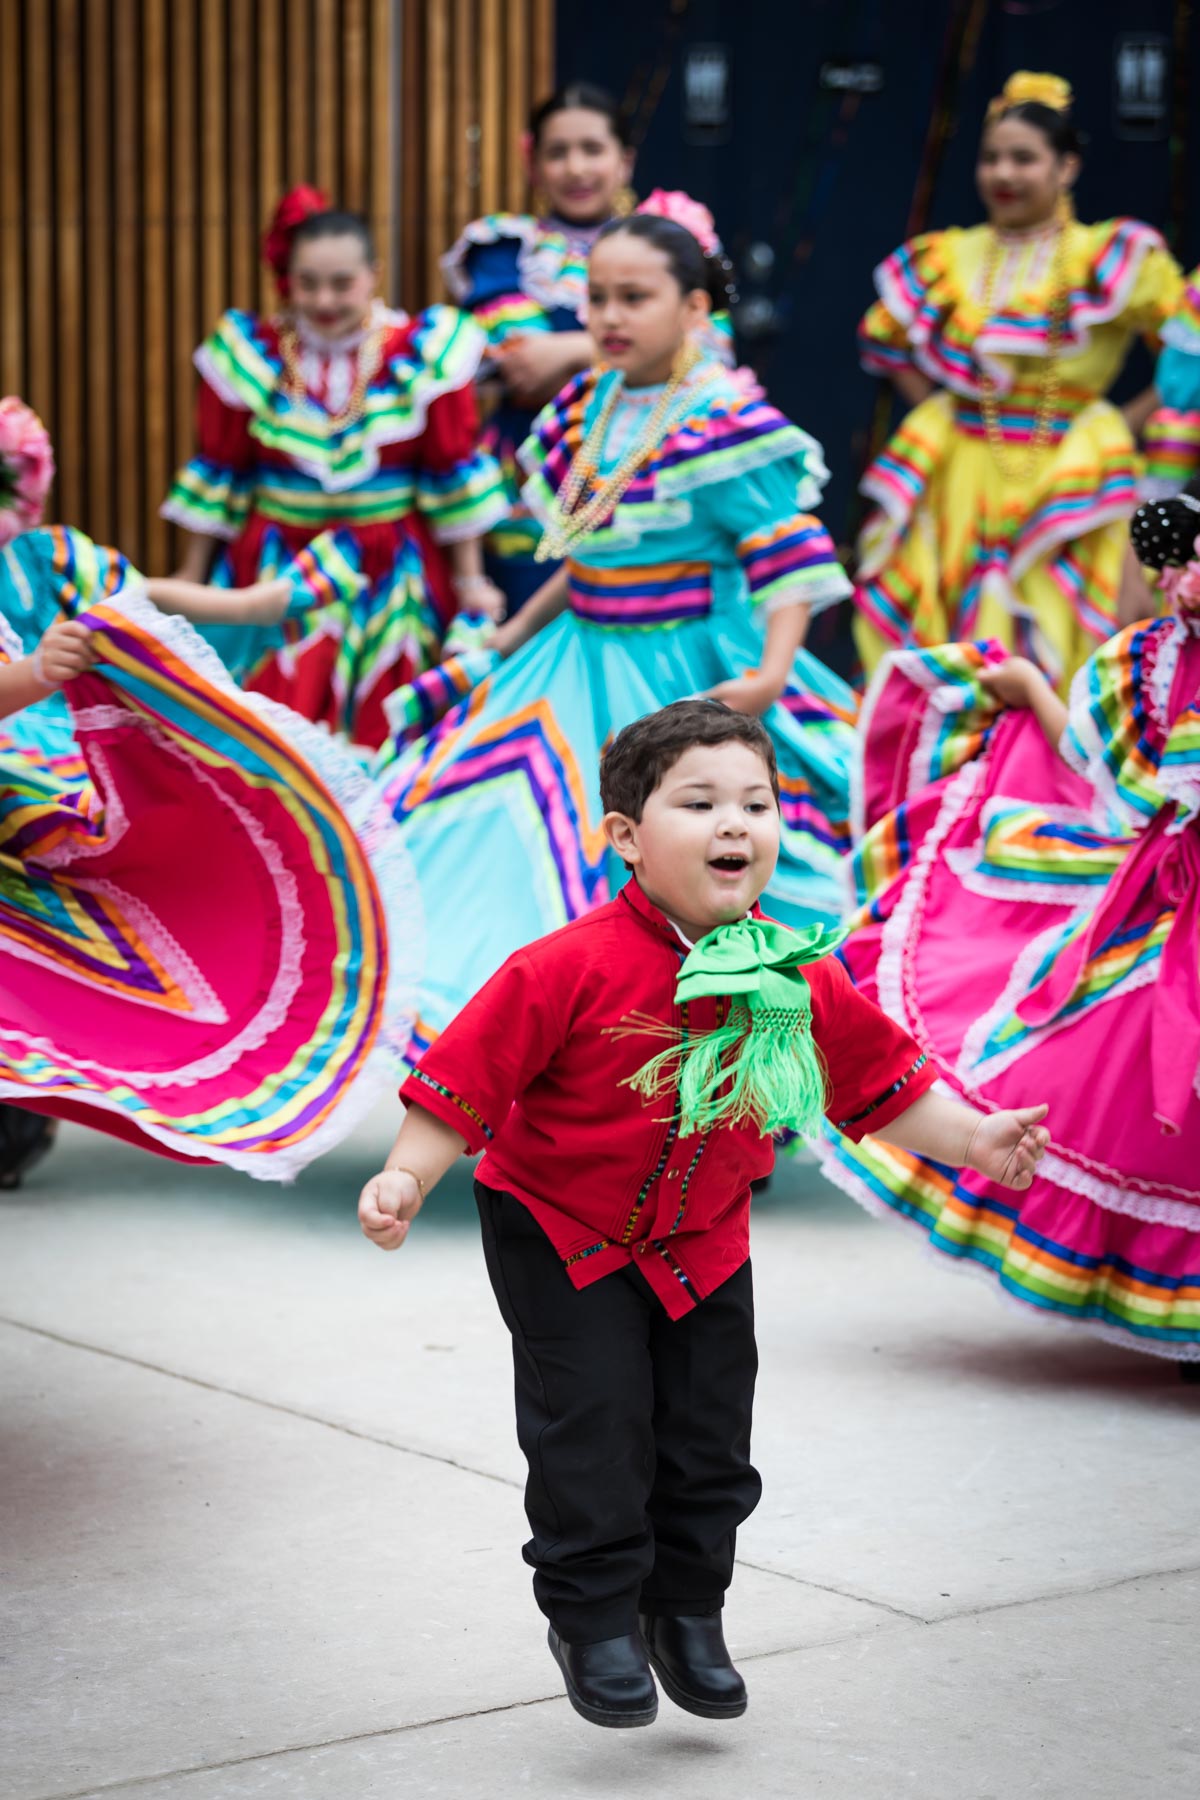 Little boy jumping in front of colorful, traditional dancers at Rey Fido event for an article on the best Fiesta photos